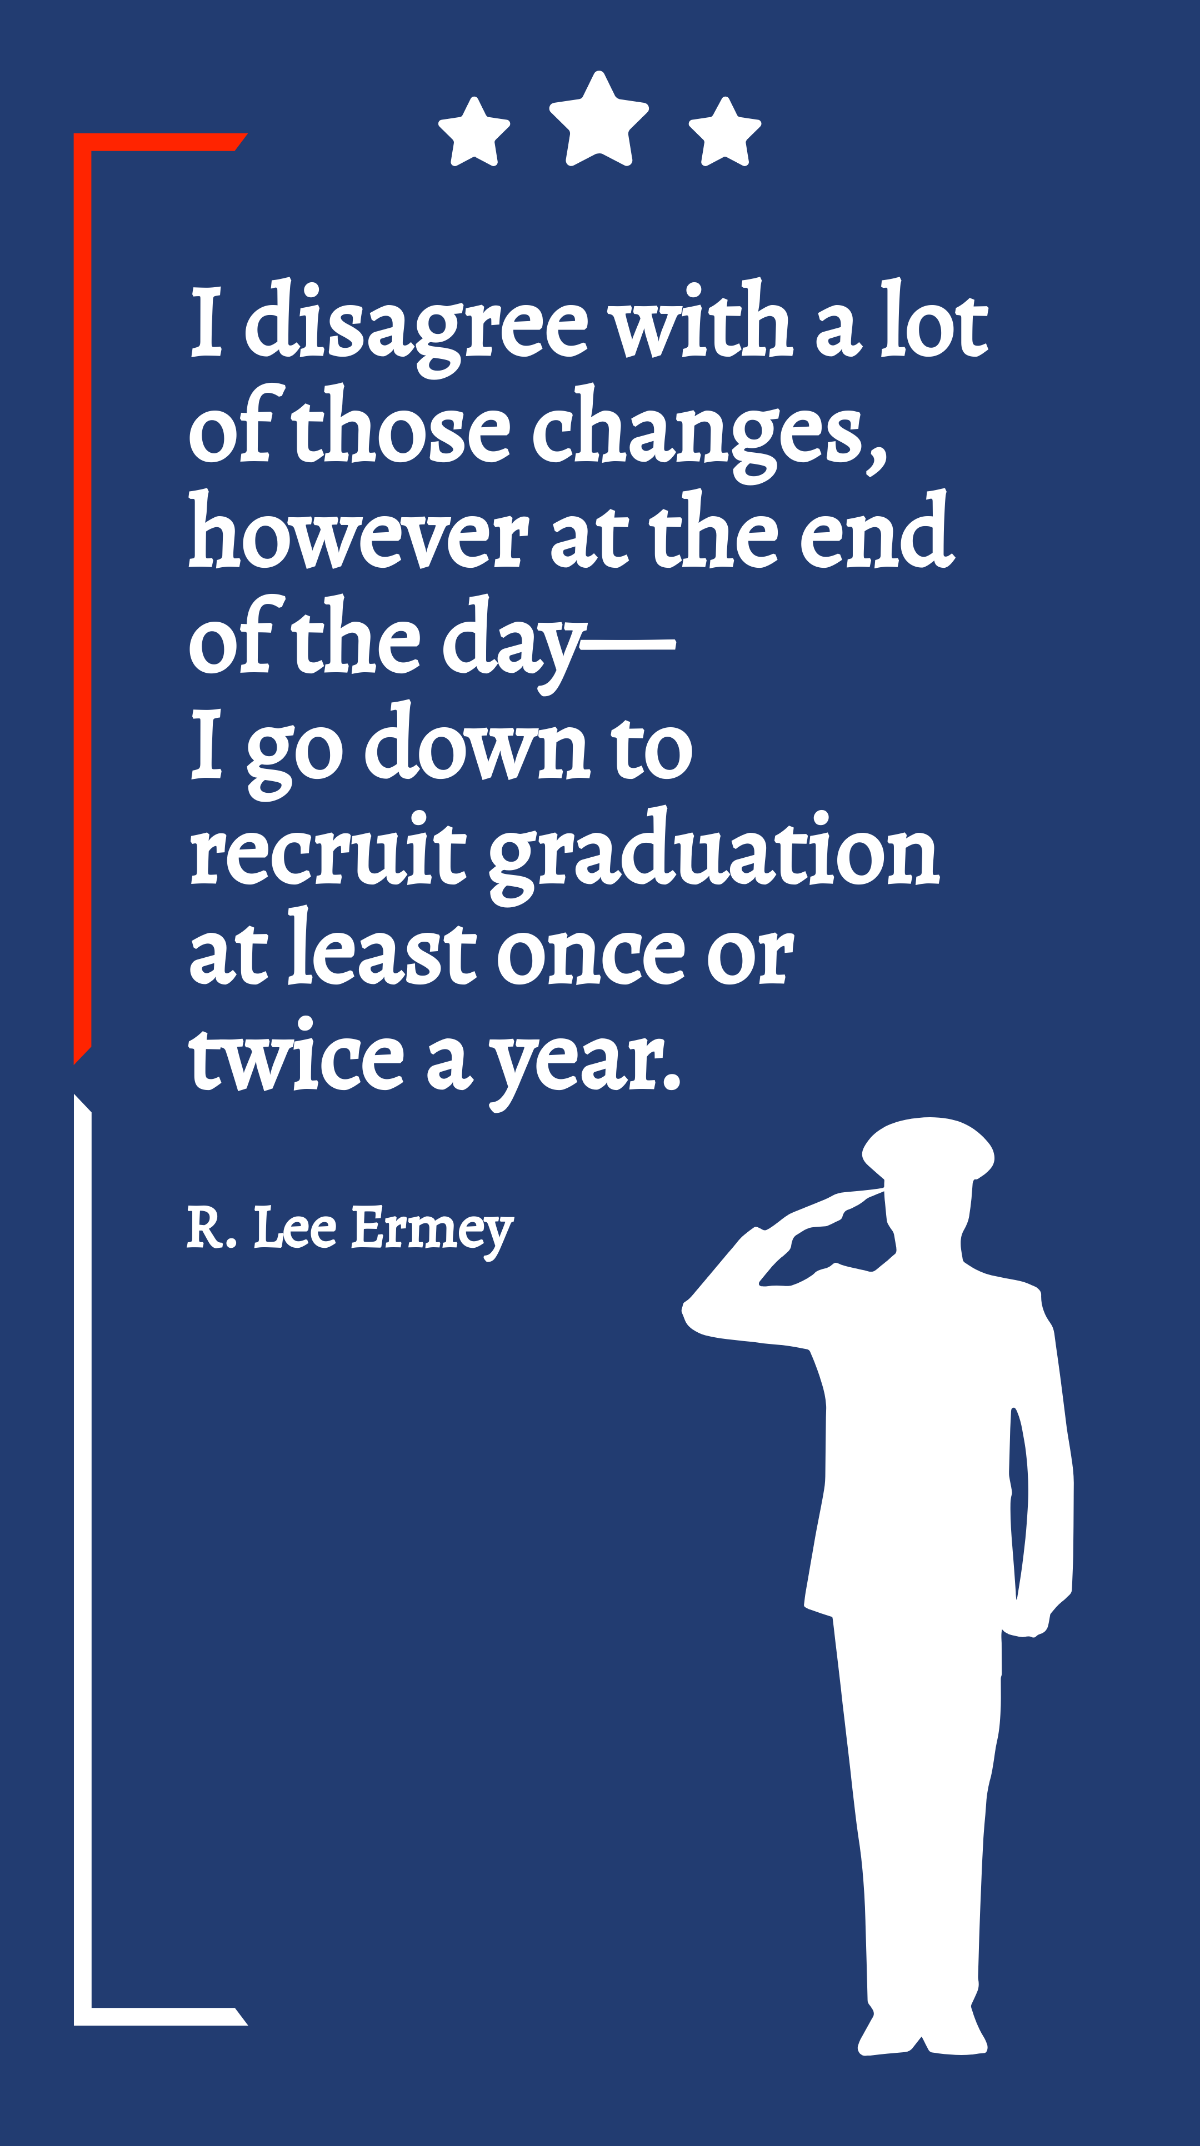 R. Lee Ermey - I disagree with a lot of those changes, however at the end of the day - I go down to recruit graduation at least once or twice a year. Template